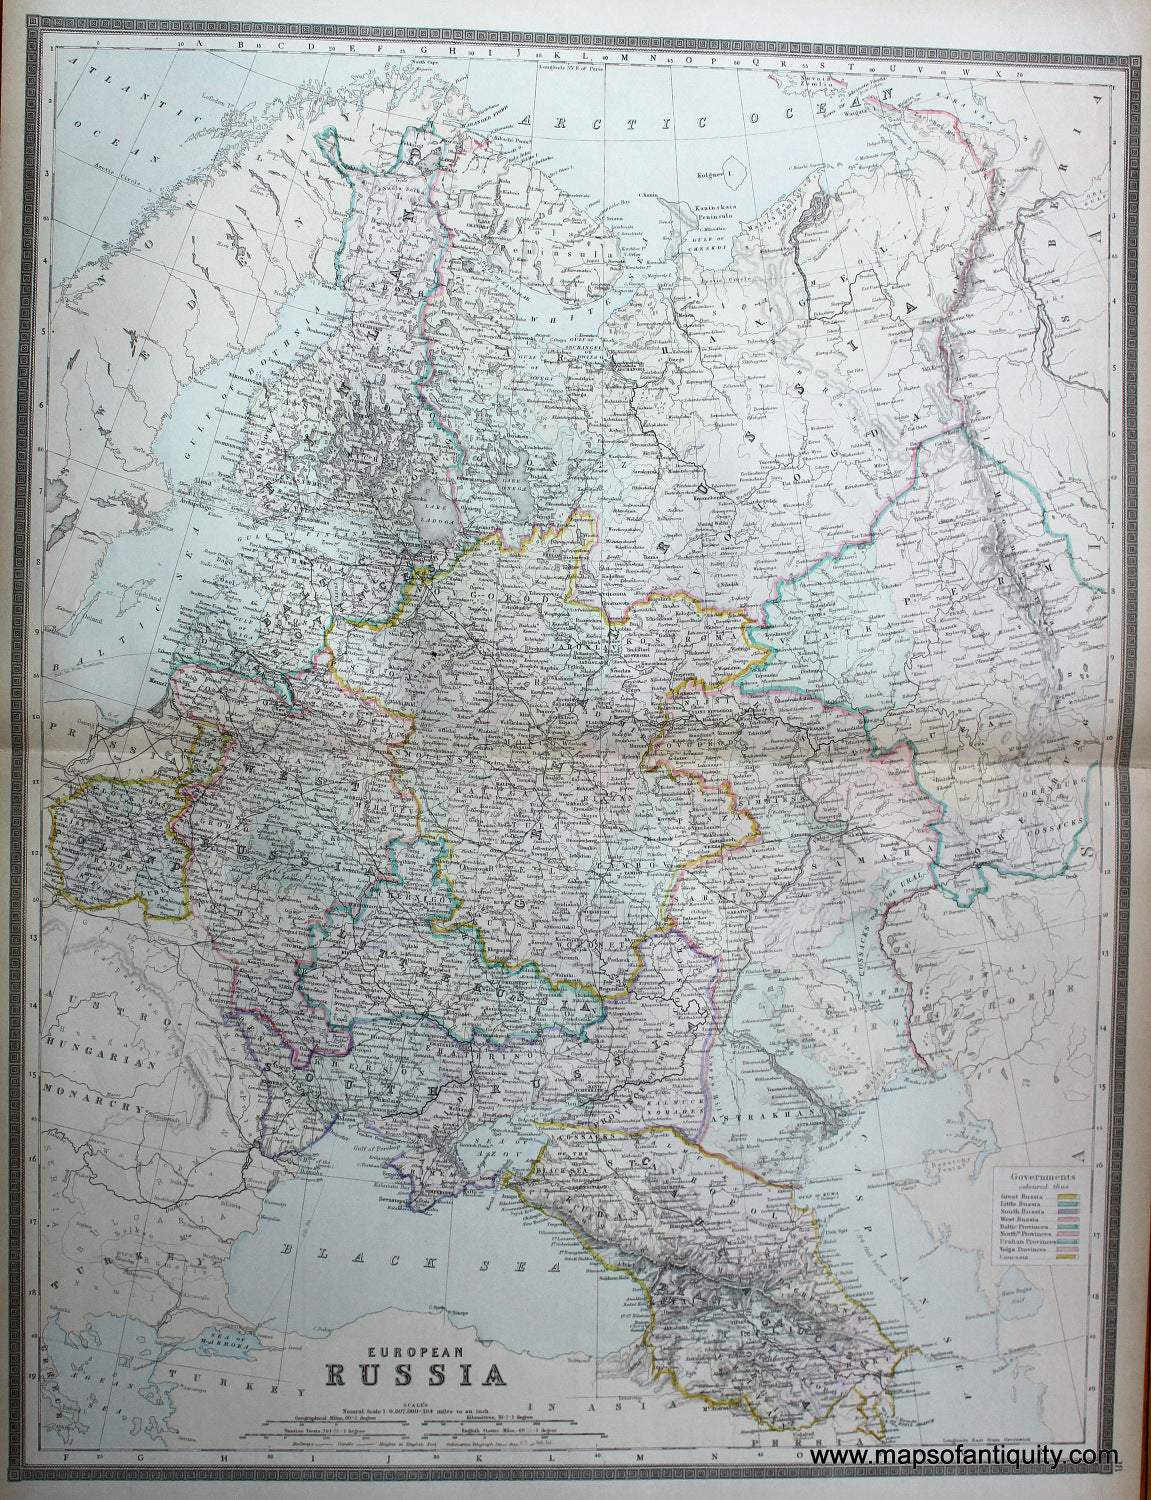 Antique-Hand-Colored-Map-European-Russia-Europe-Russia-1887-Bradley-Maps-Of-Antiquity